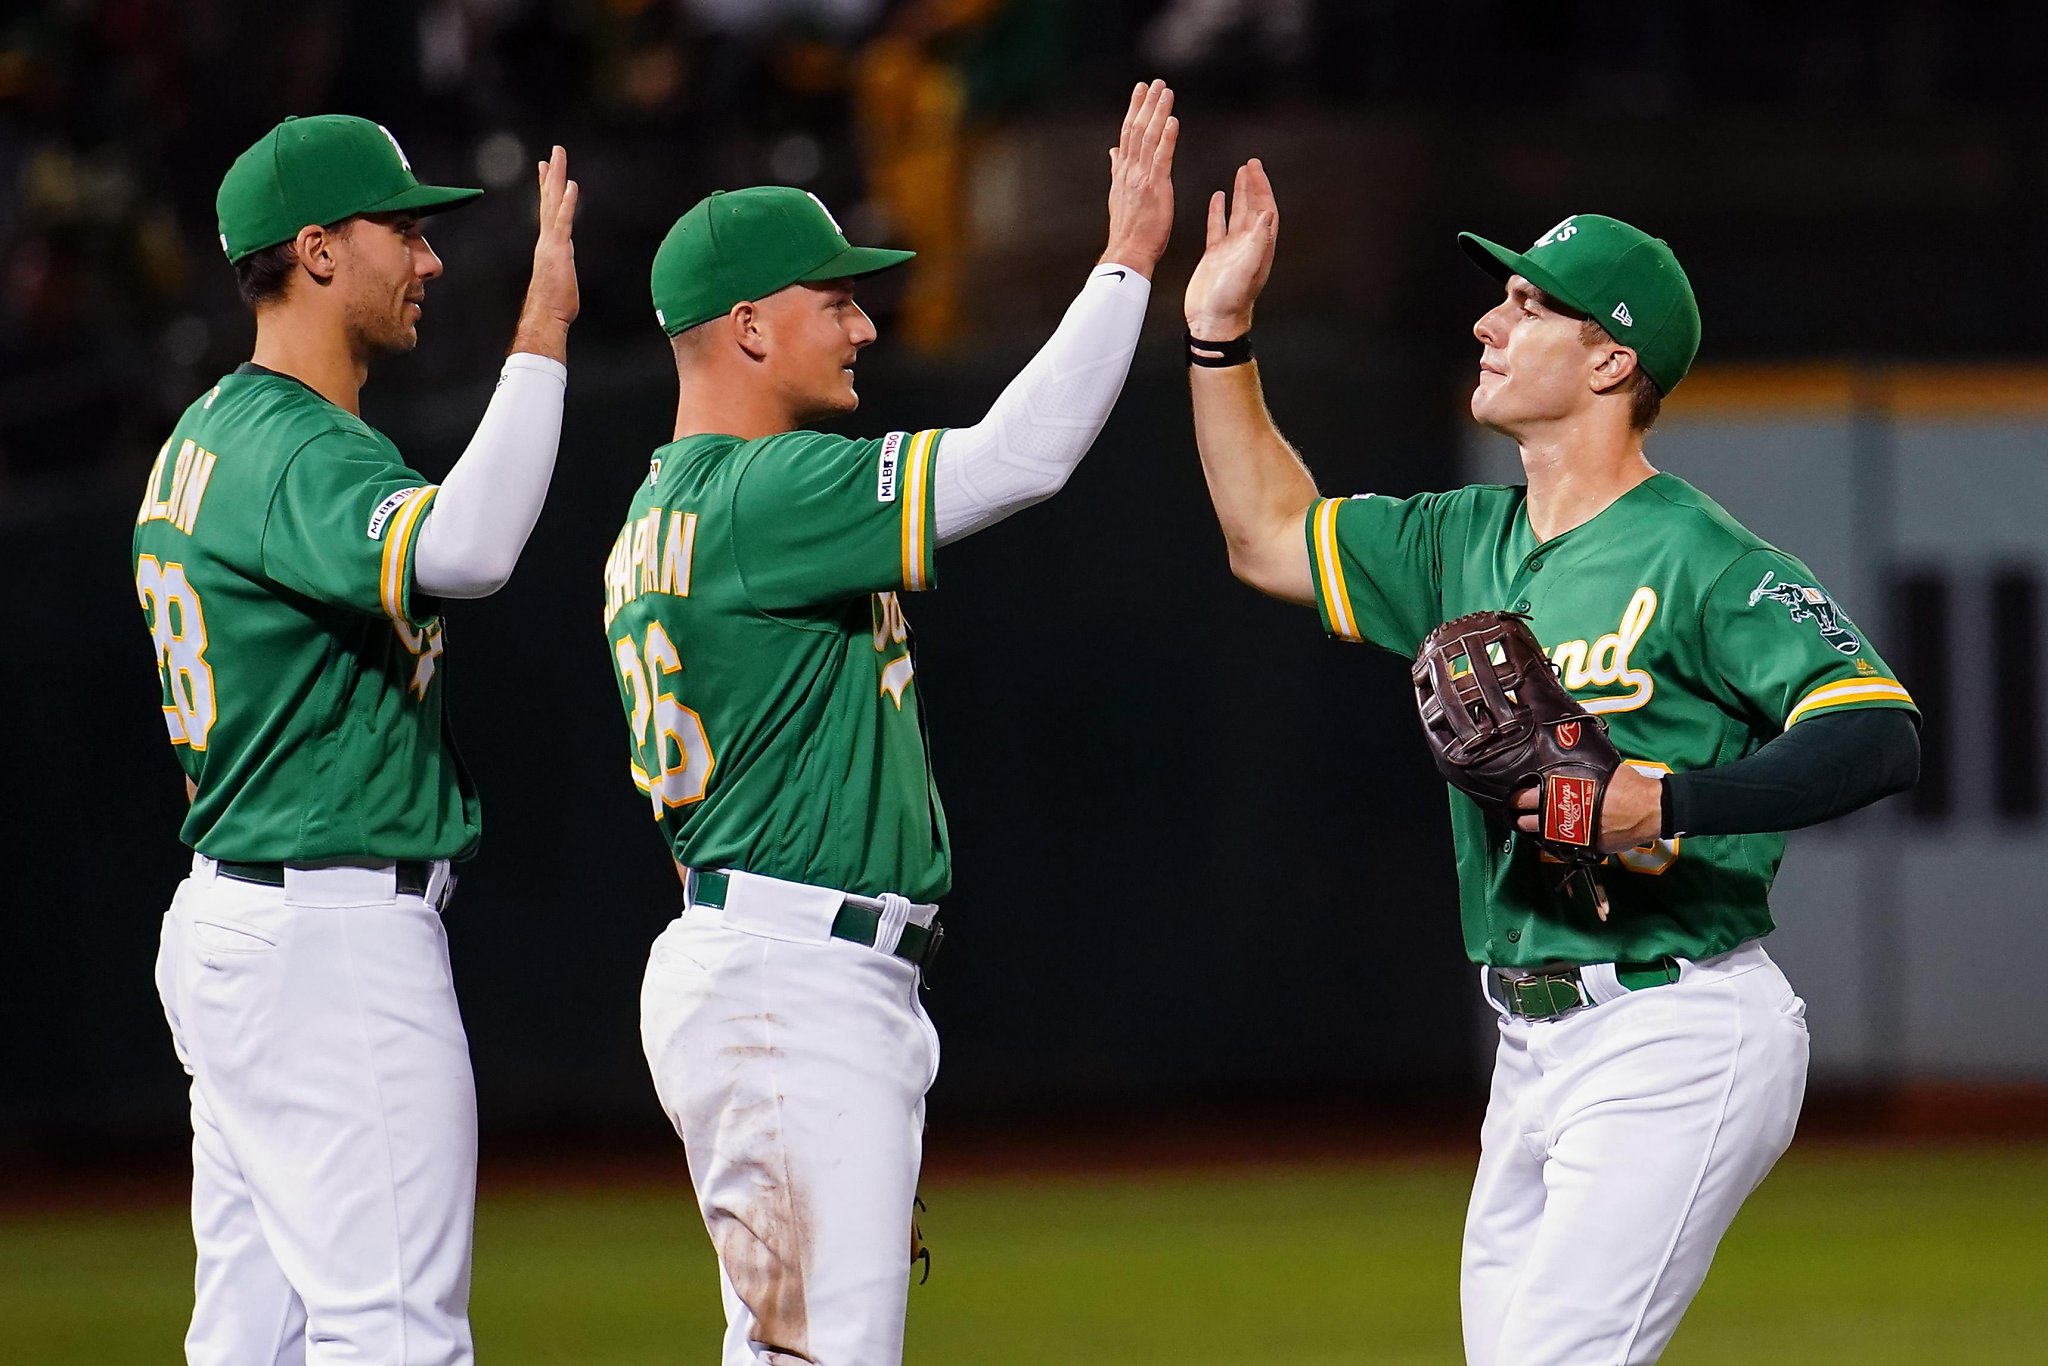 The Oakland A's will win the World Series: Here's why